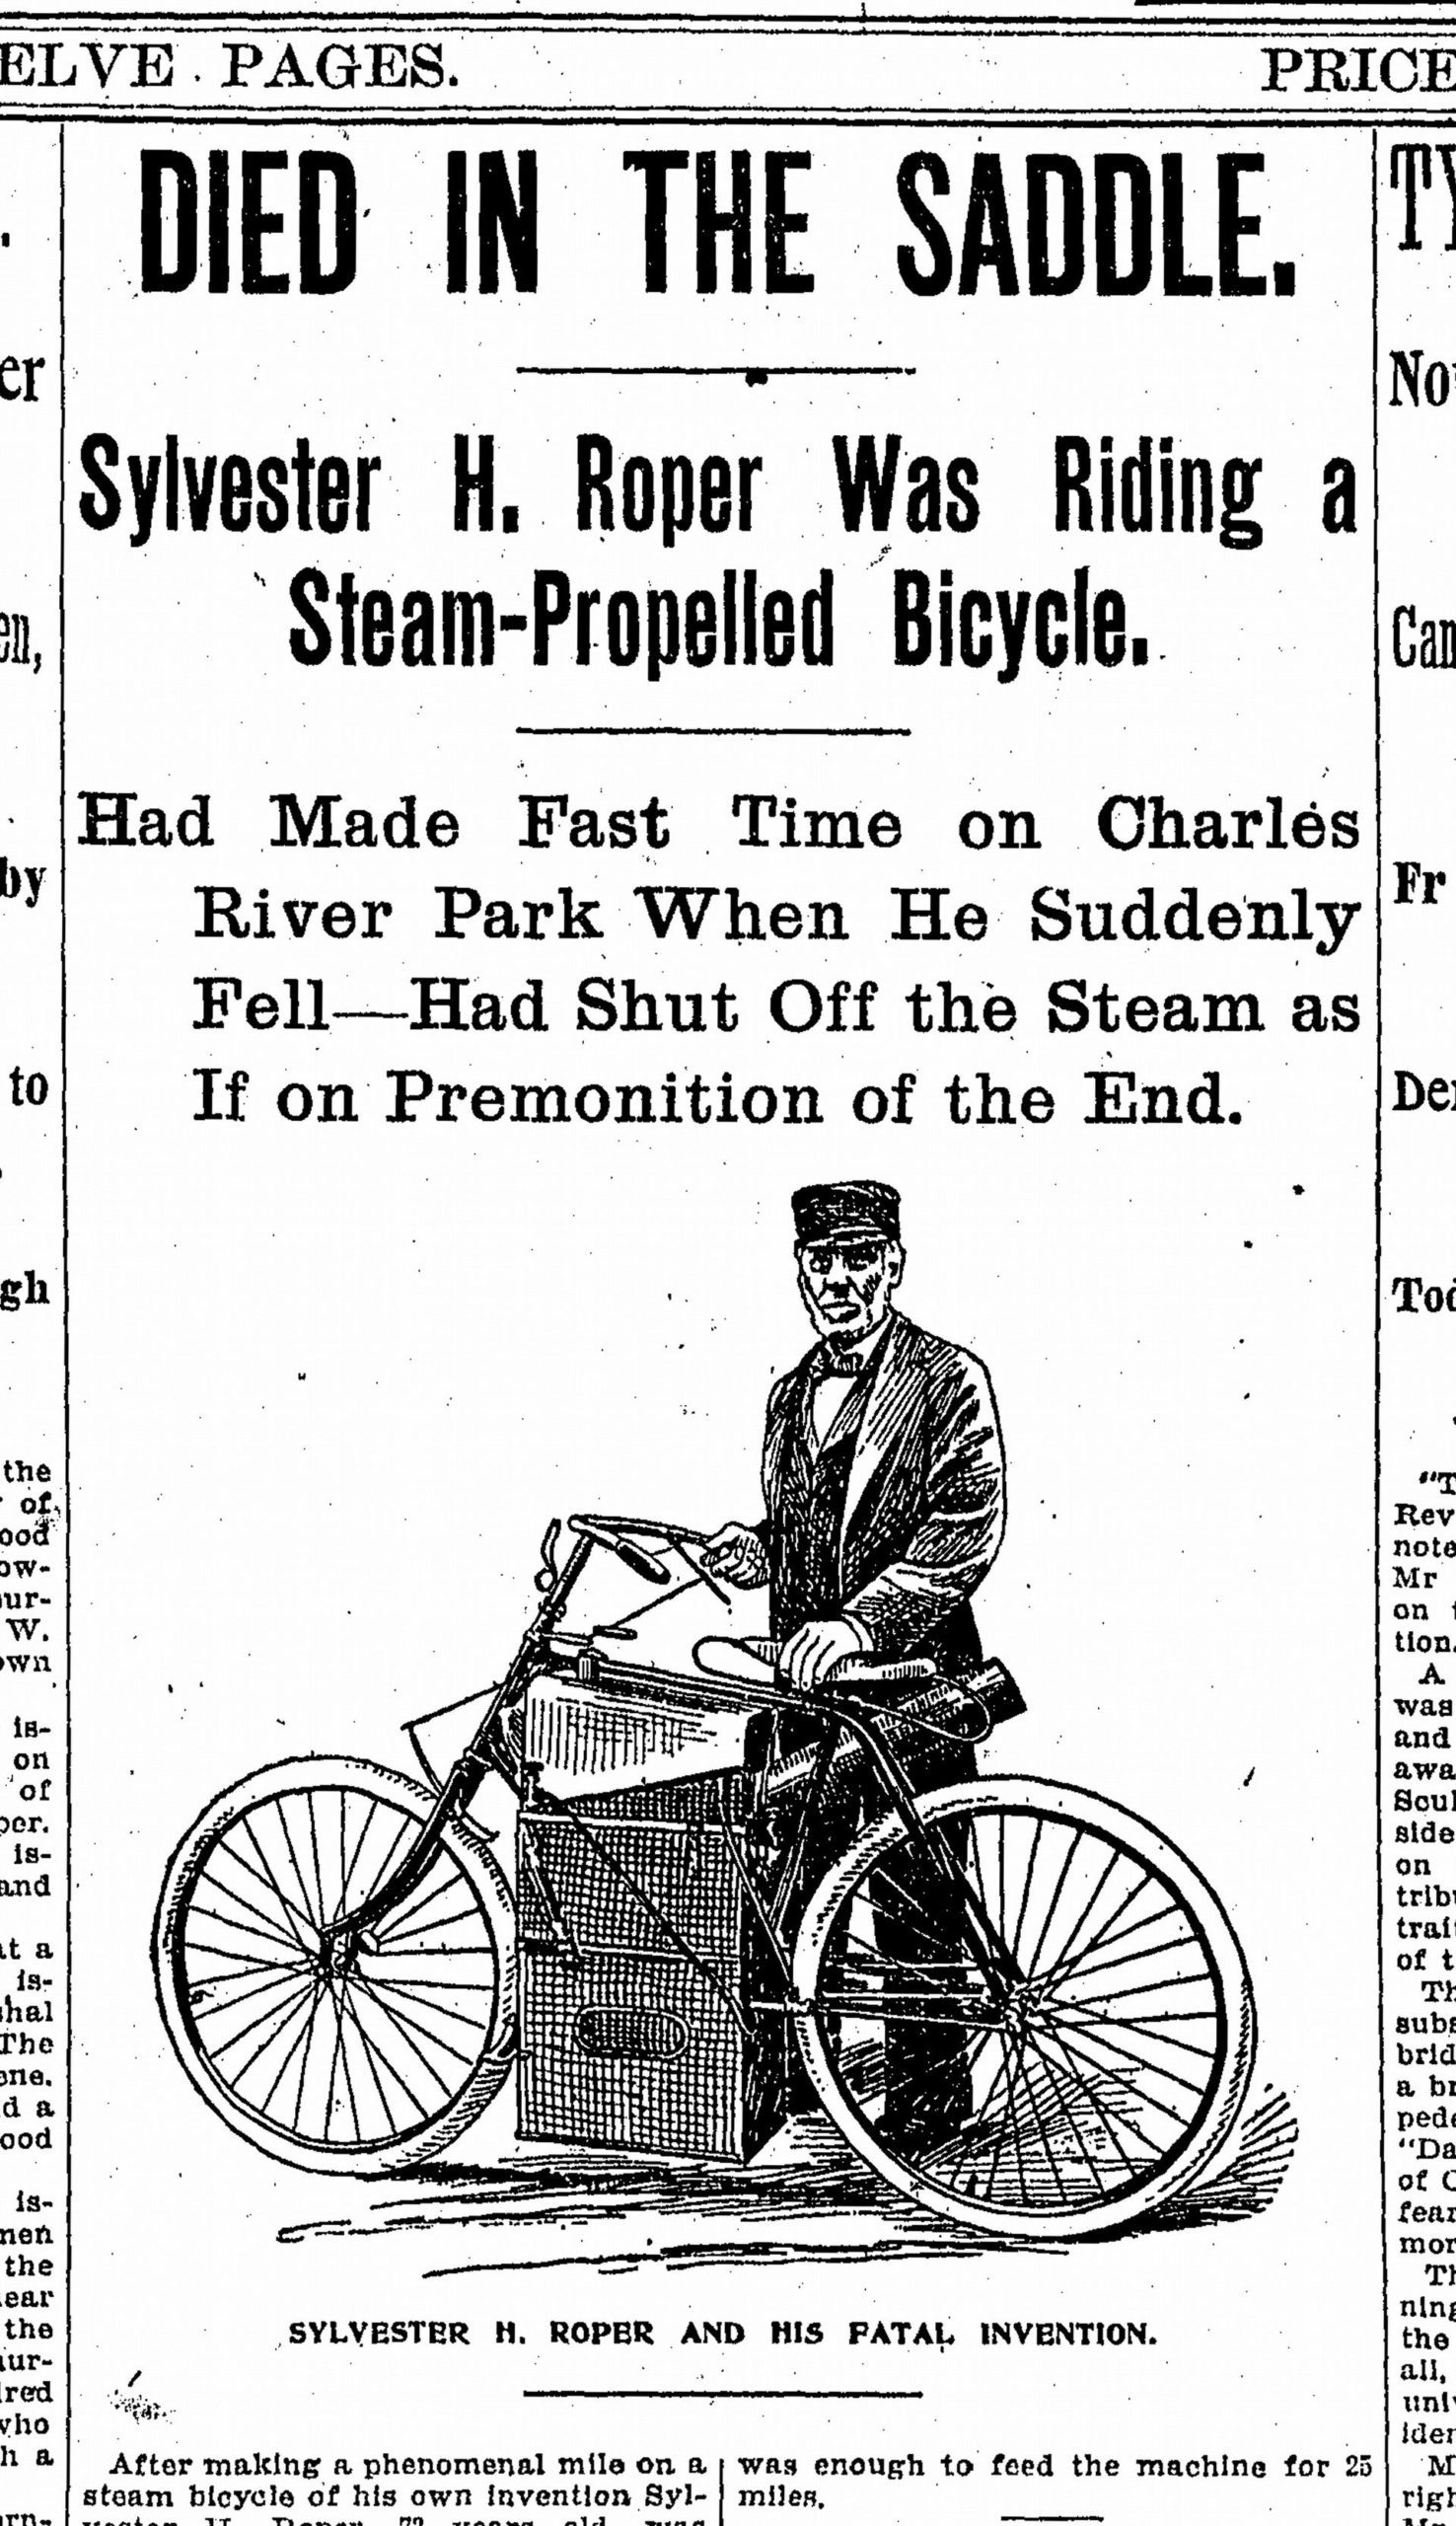 News clipping showing steam-powered motorcycle and inventor after his accidental death